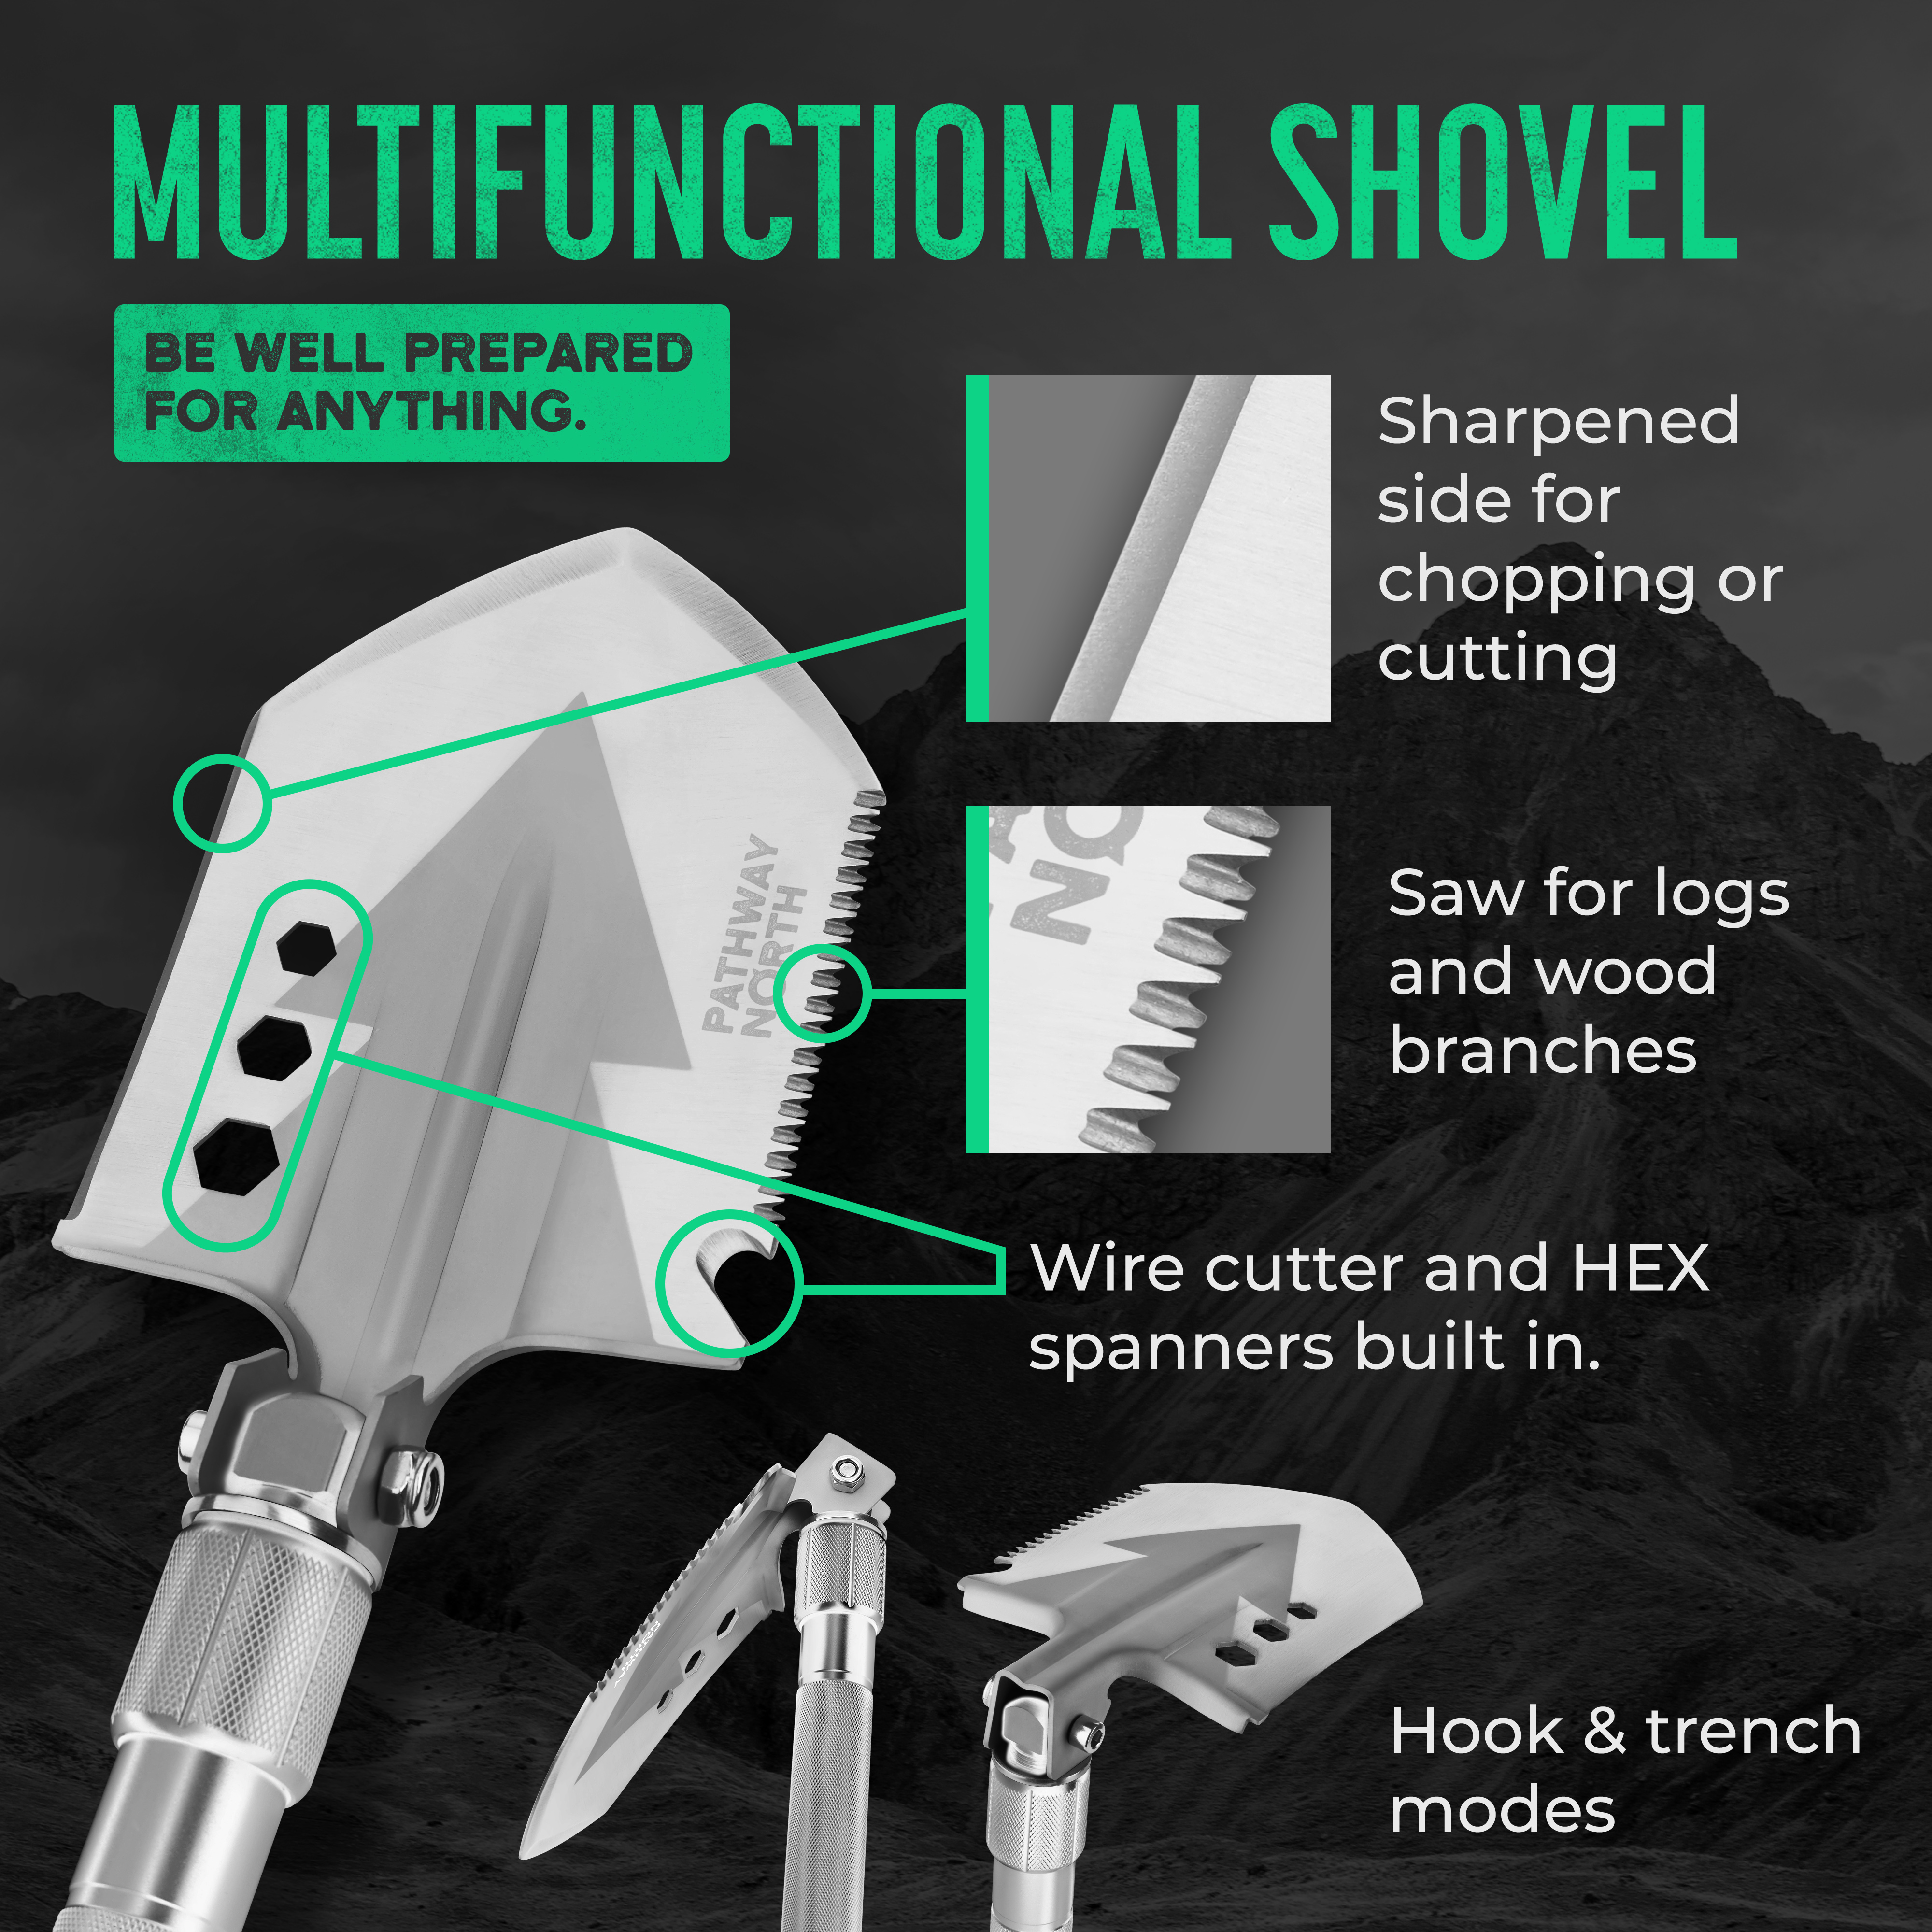 Pathway North Survival Shovel and Camping Axe – Stainless Steel Tactical, Survival Multi-Tool and Survival Hatchet Equipment for Outdoor Hiking Camping Gear, Hunting, Backpacking Emergency Kit - image 3 of 8